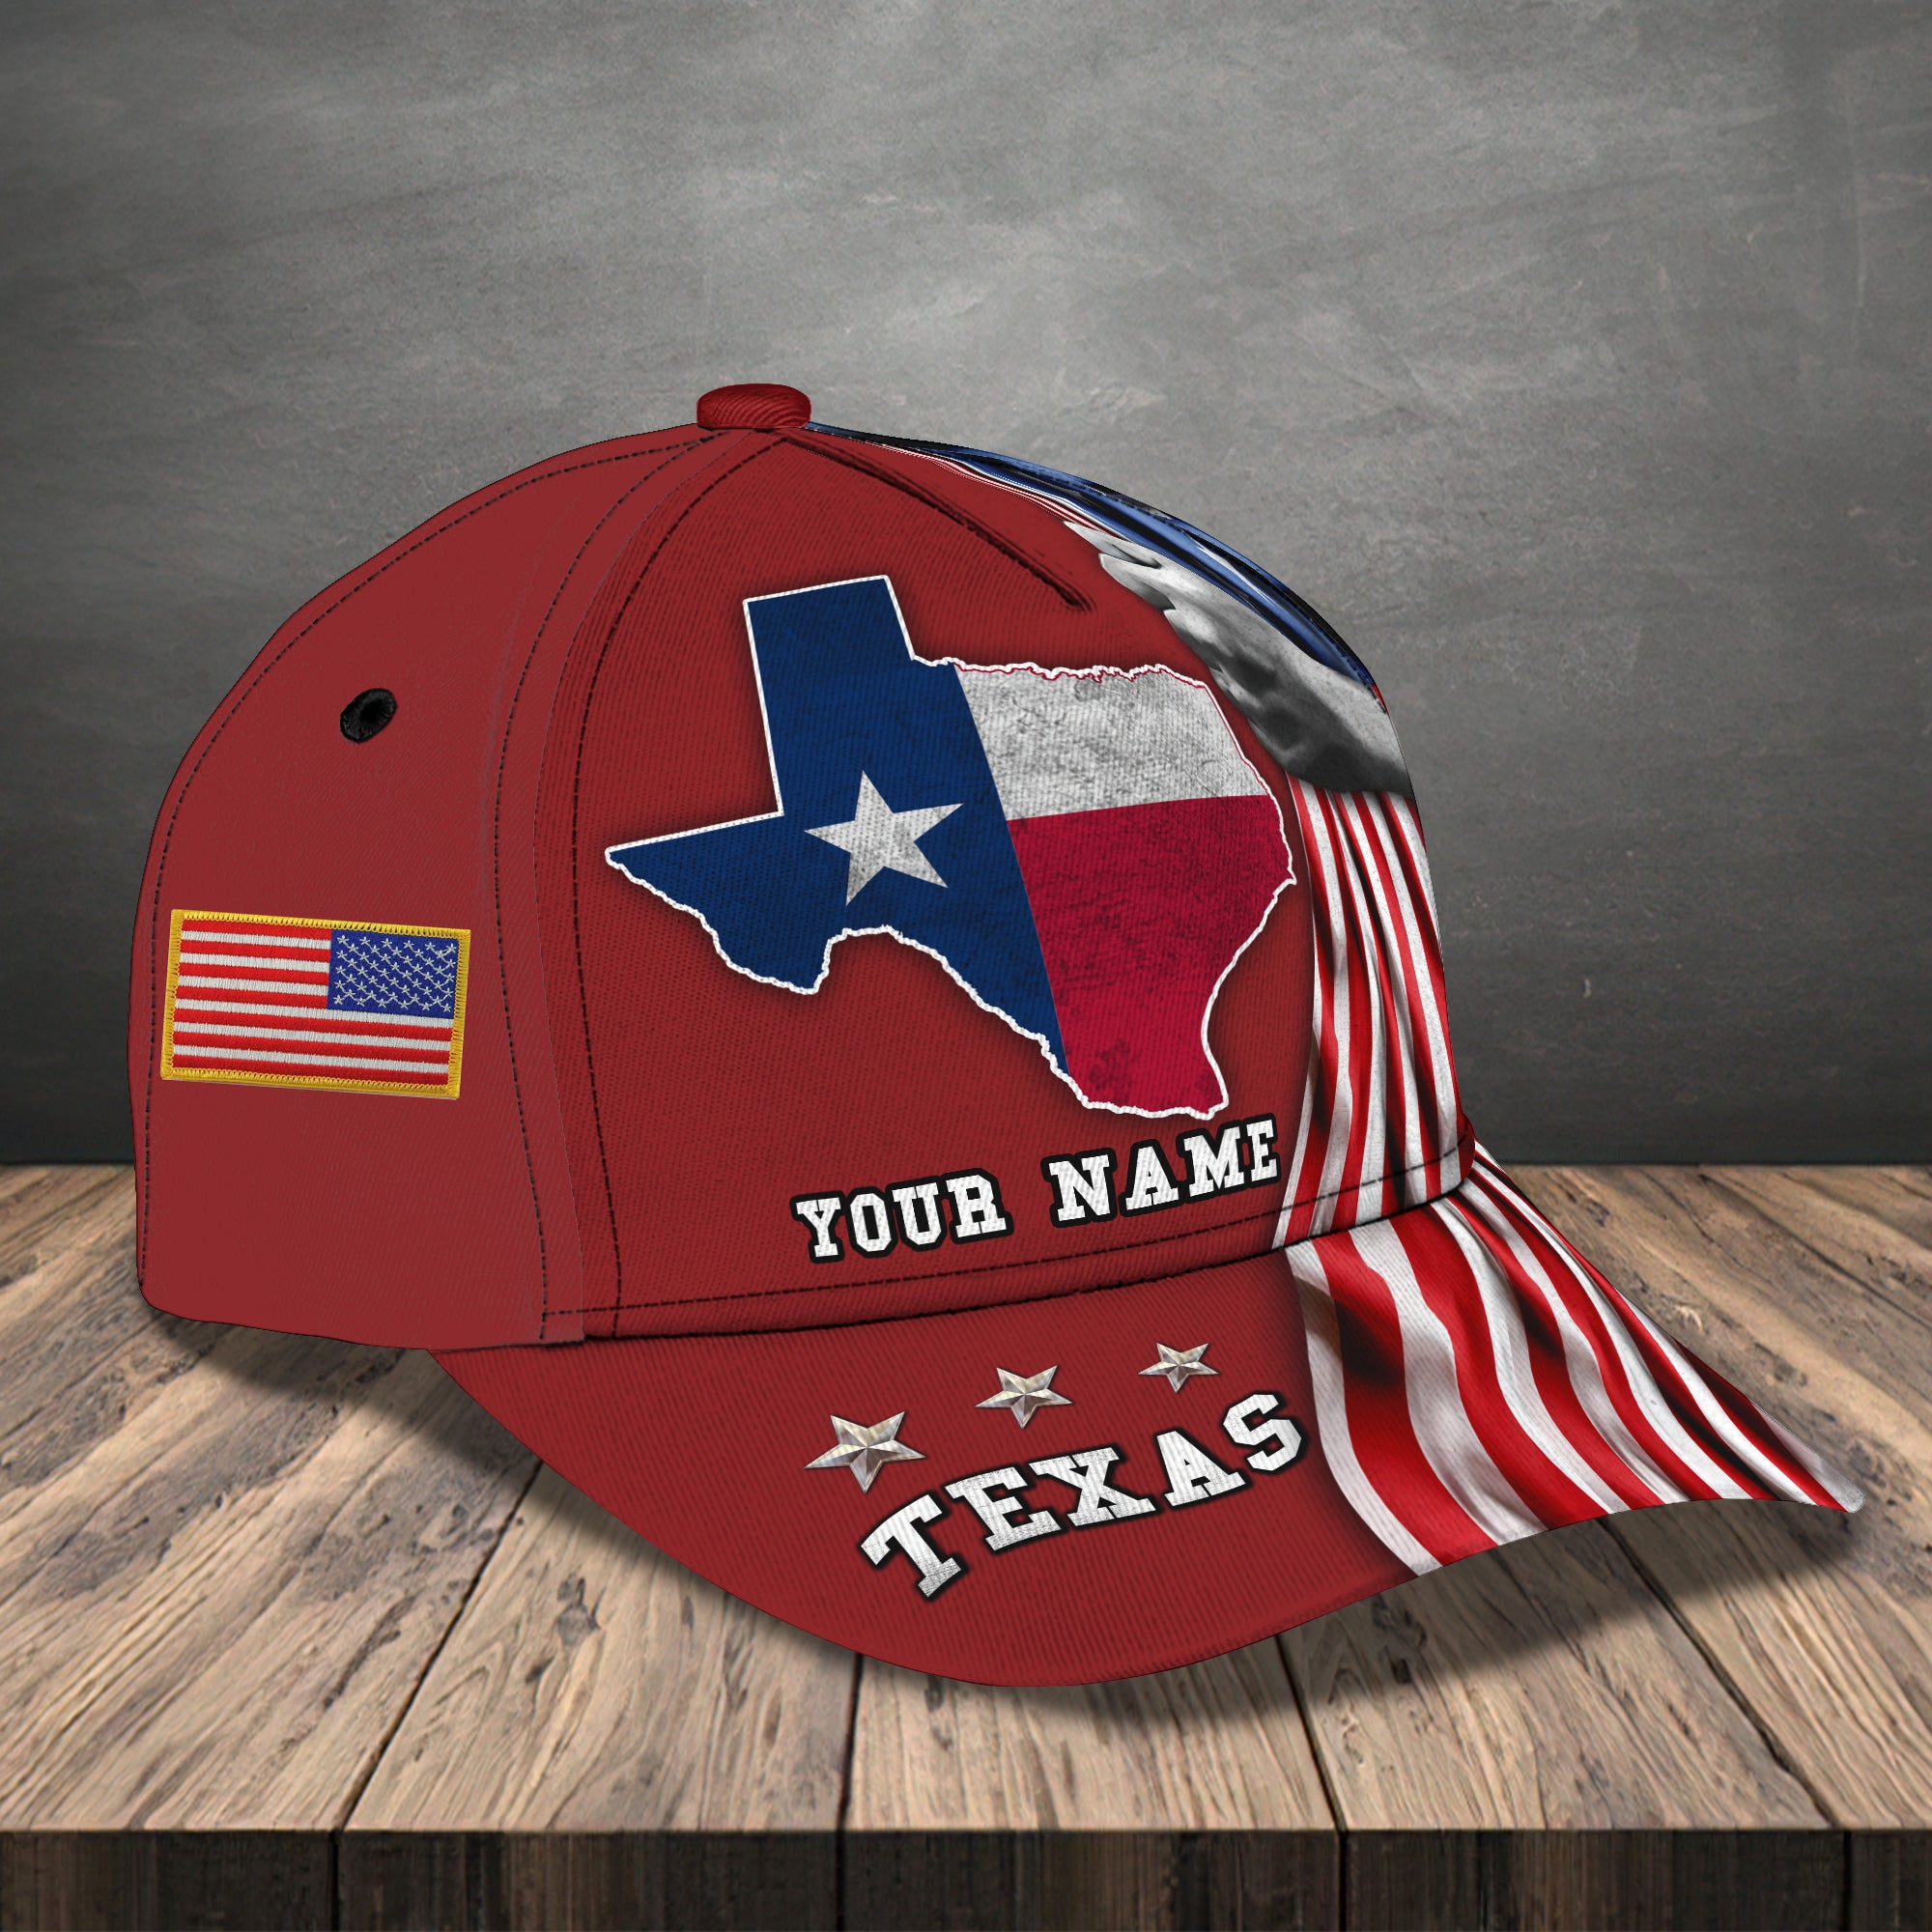 Texas - Personalized Name Cap 51 - Nvc97